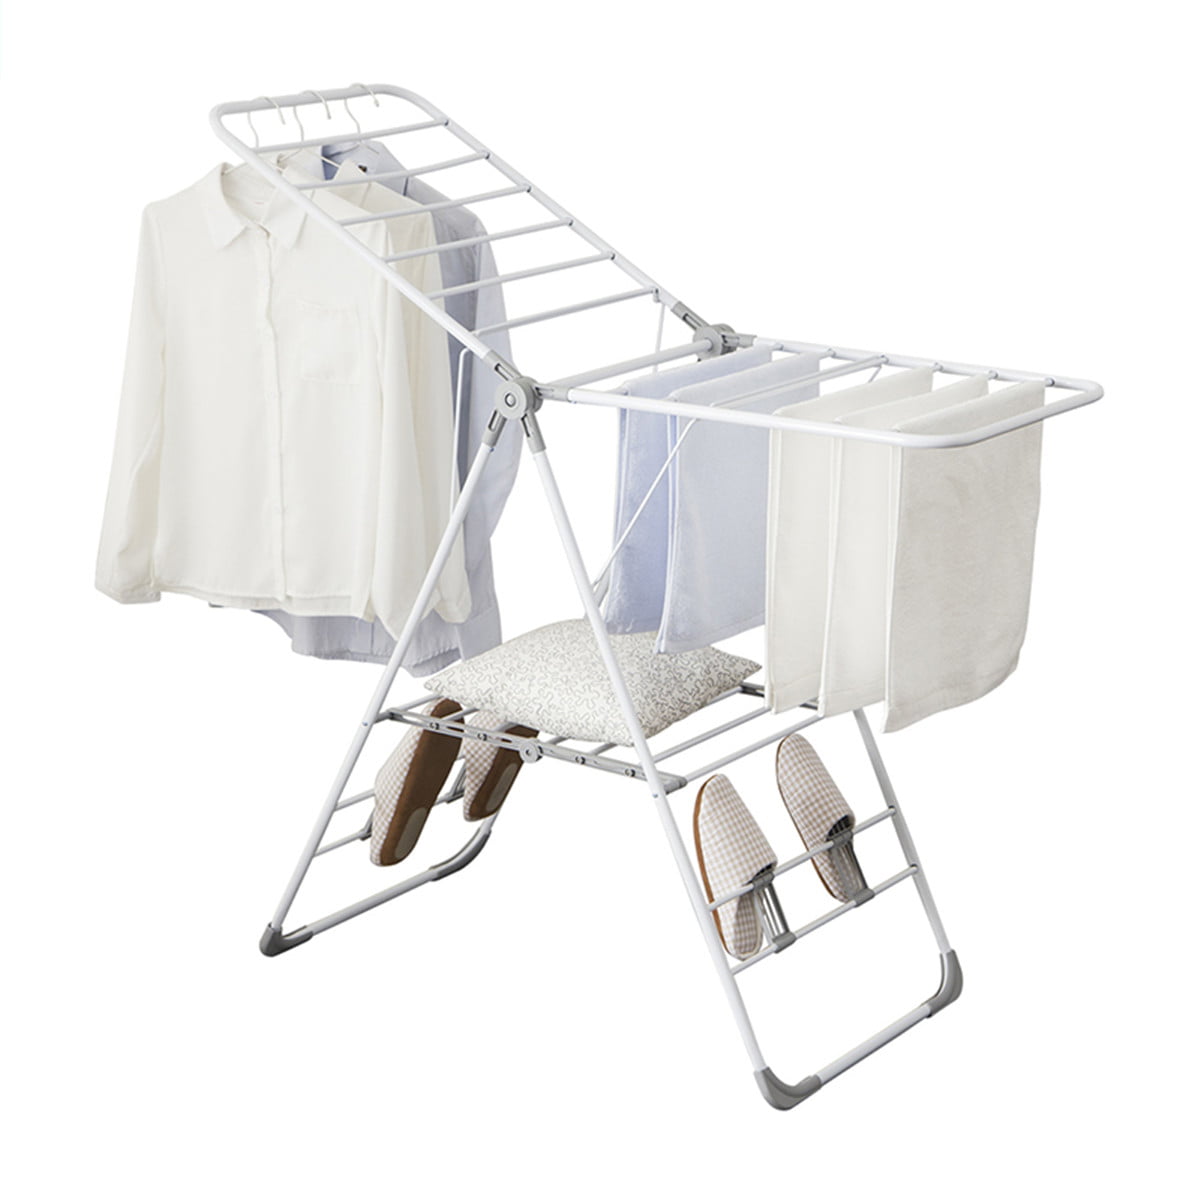 Folding Clothes Drying Rack Portable Laundry Drying Rack Indoor Outdoor Space Saving Dryer